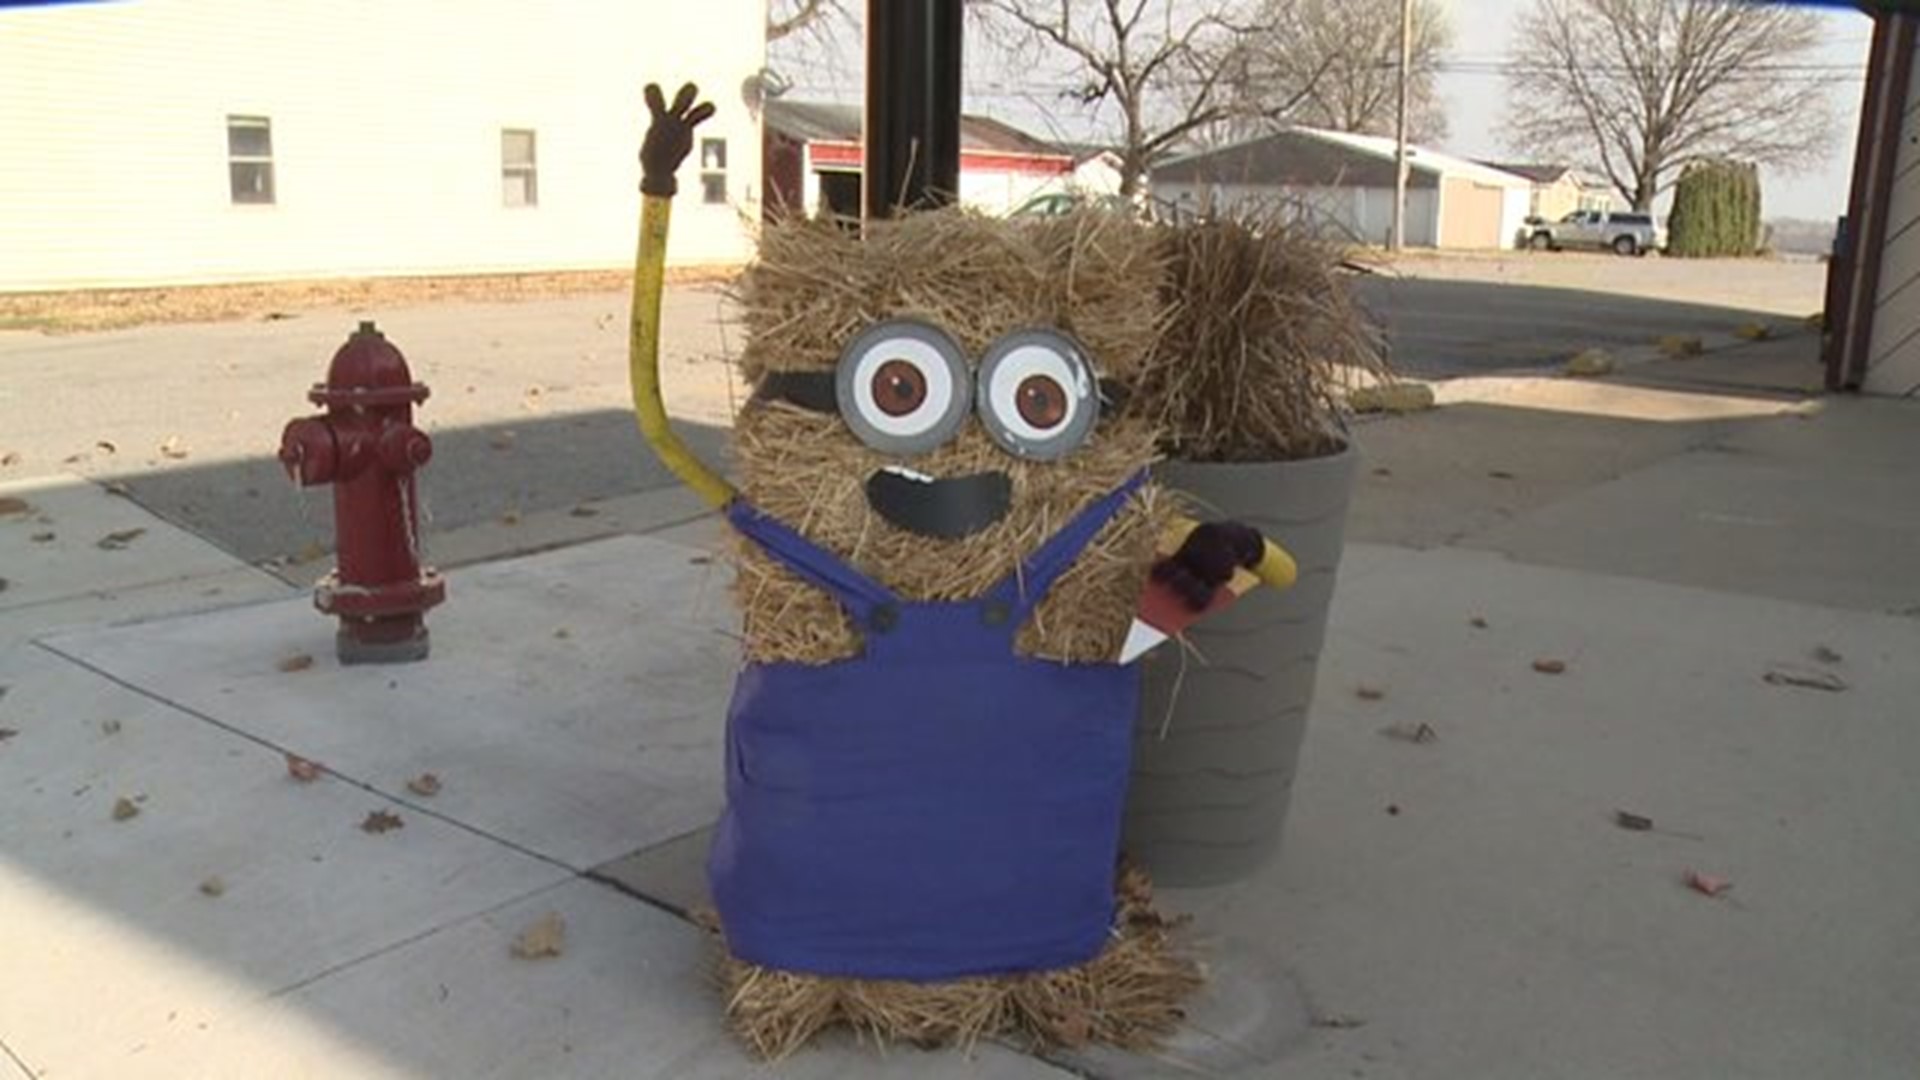 Minion decorations get set on fire in Wapello